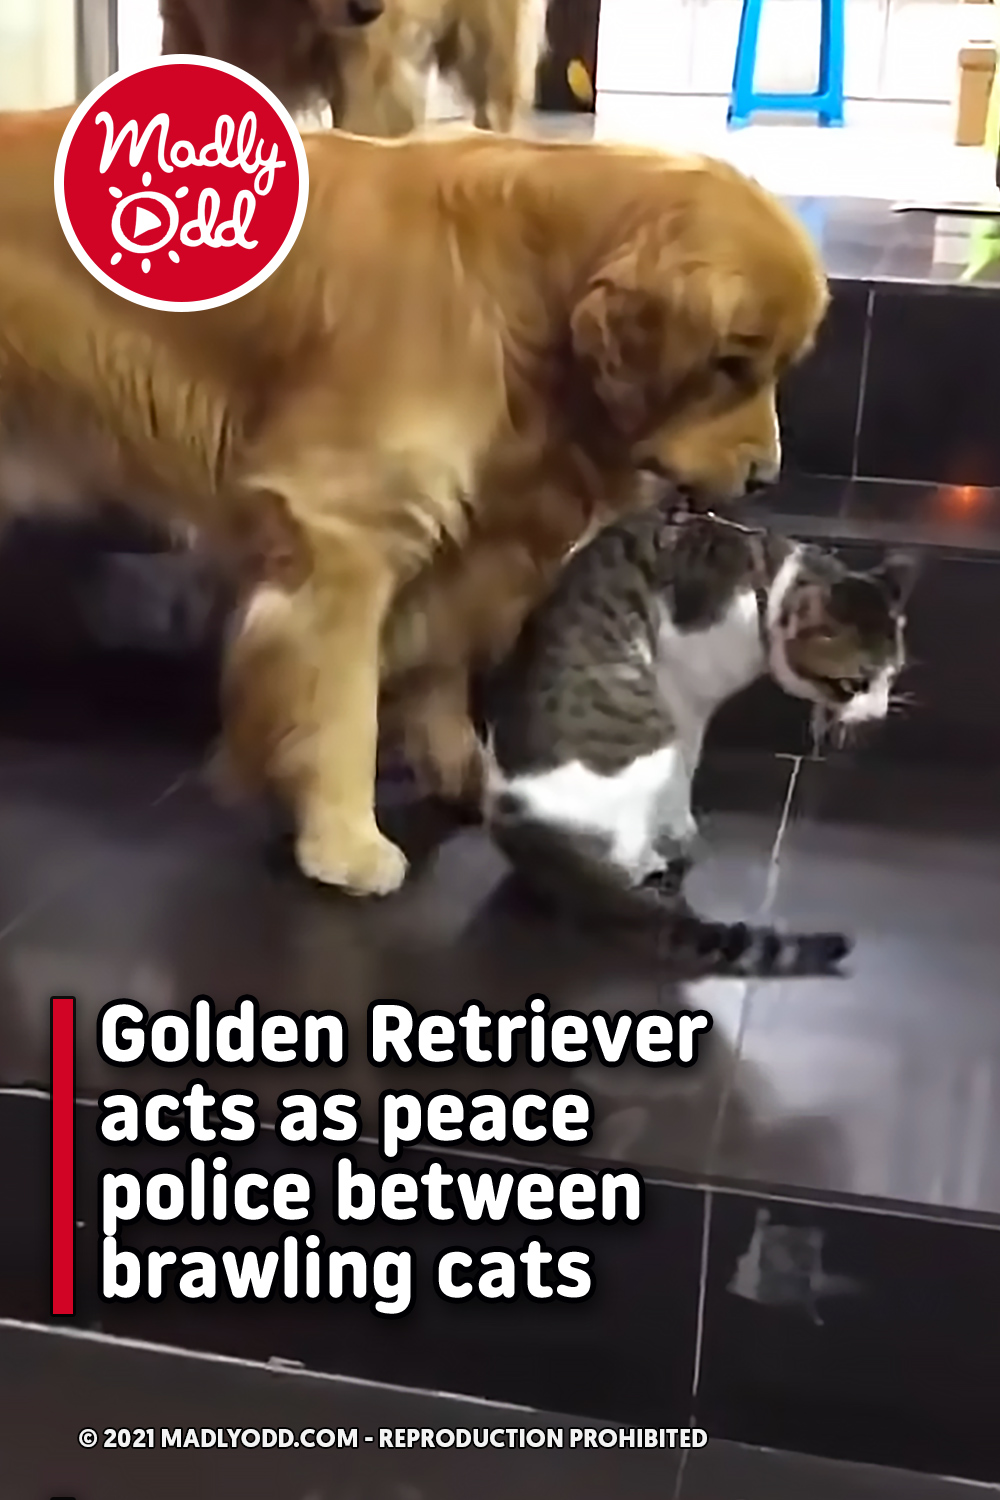 Golden Retriever acts as peace police between brawling cats